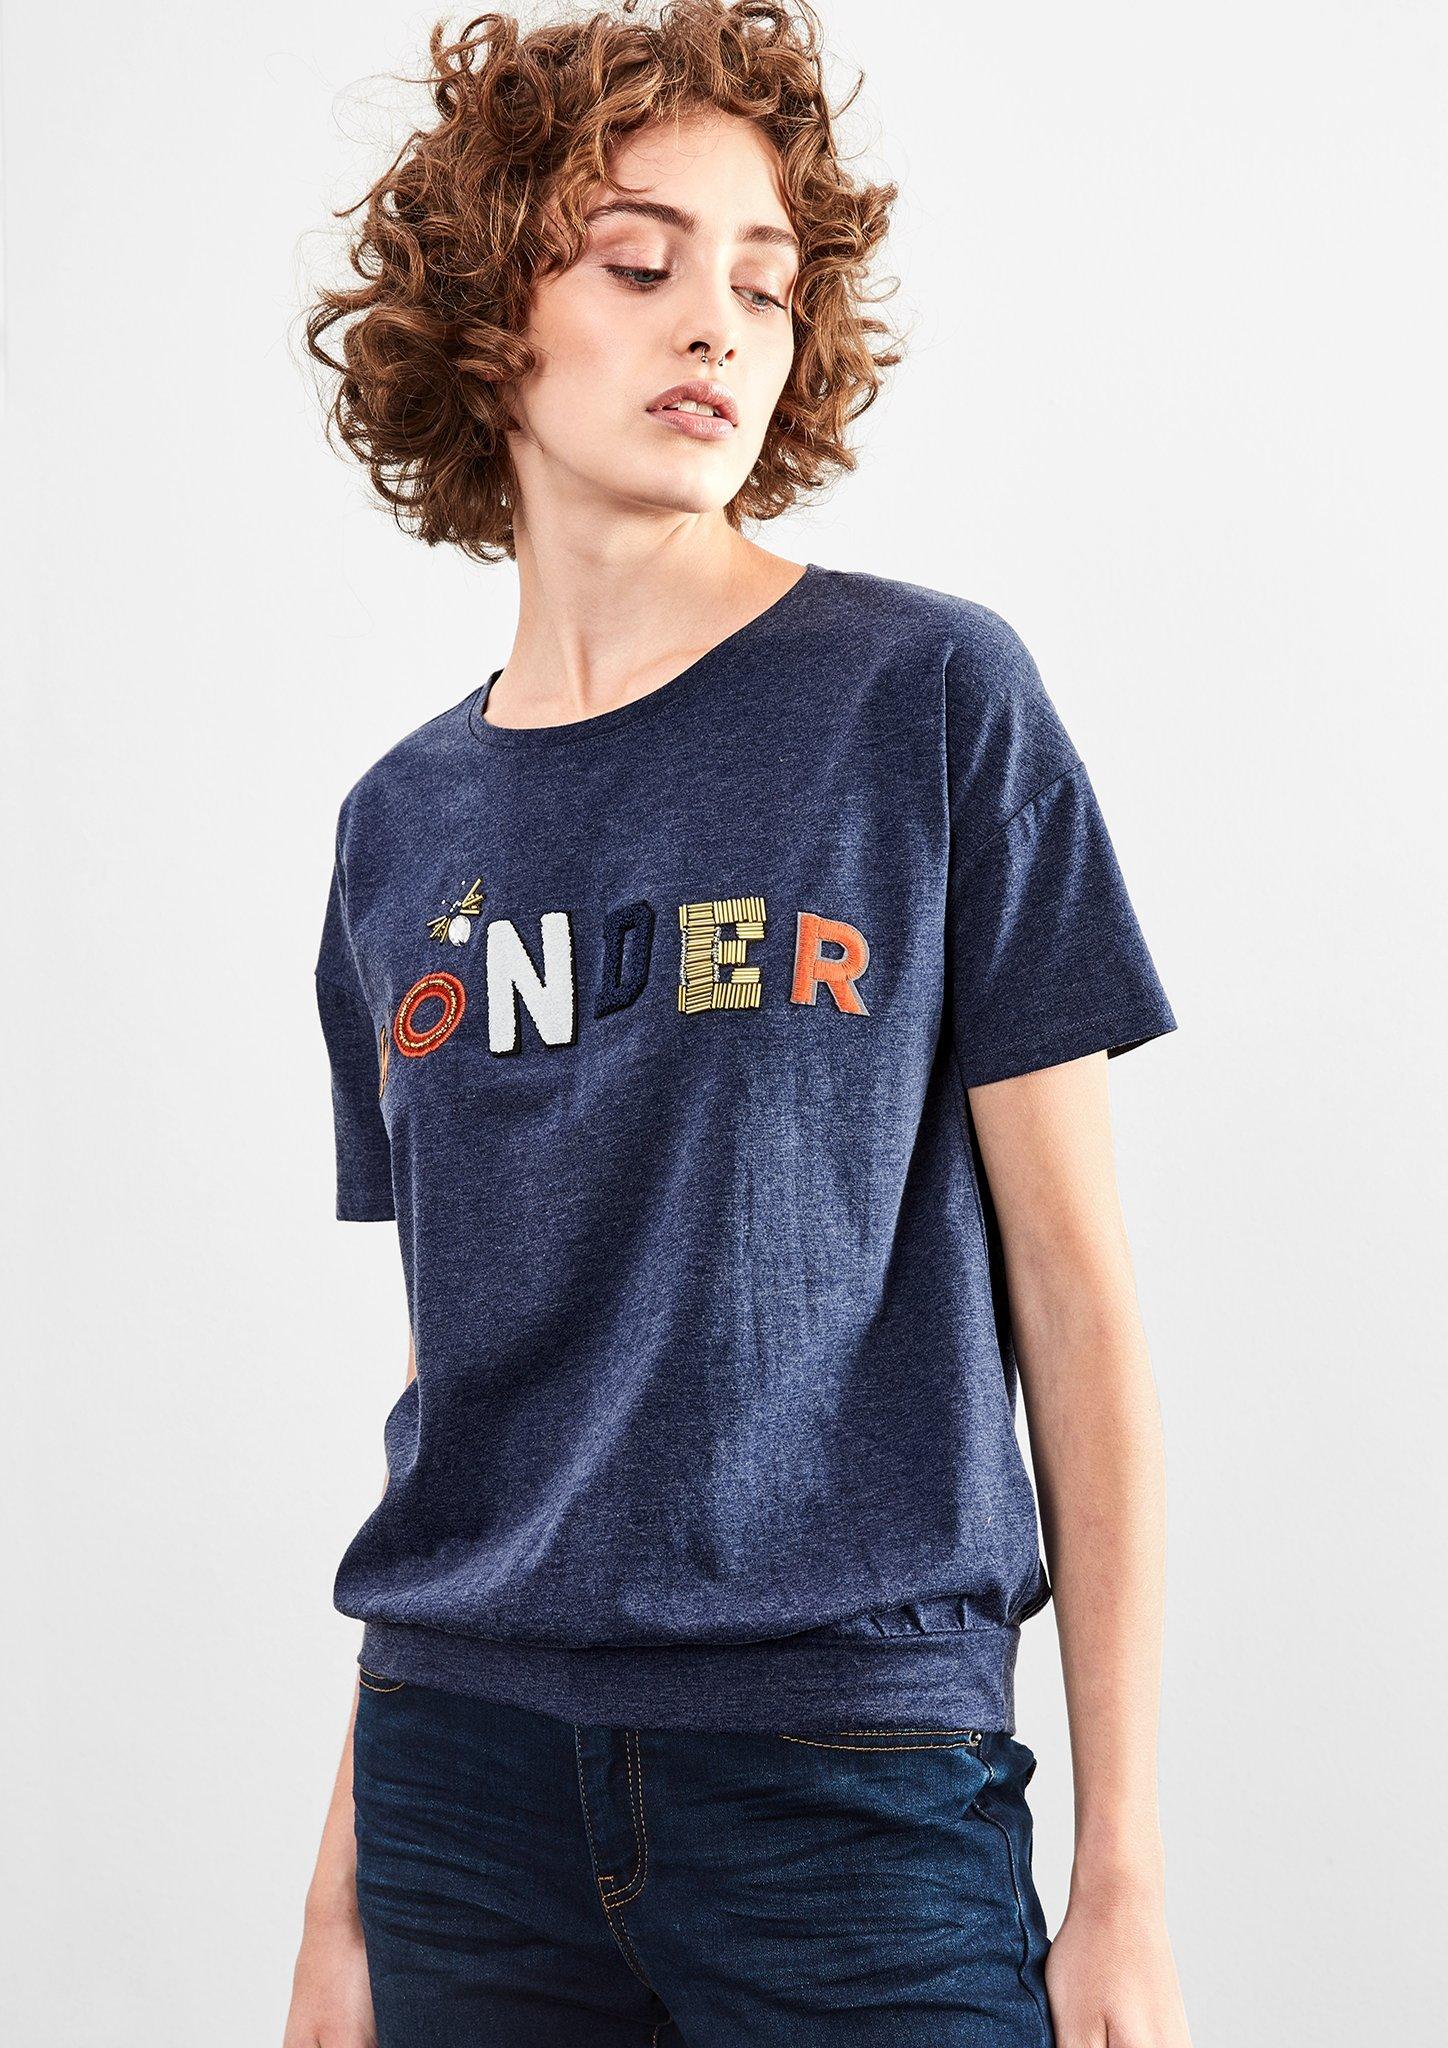 Print T-Shirts for Women | s.Oliver